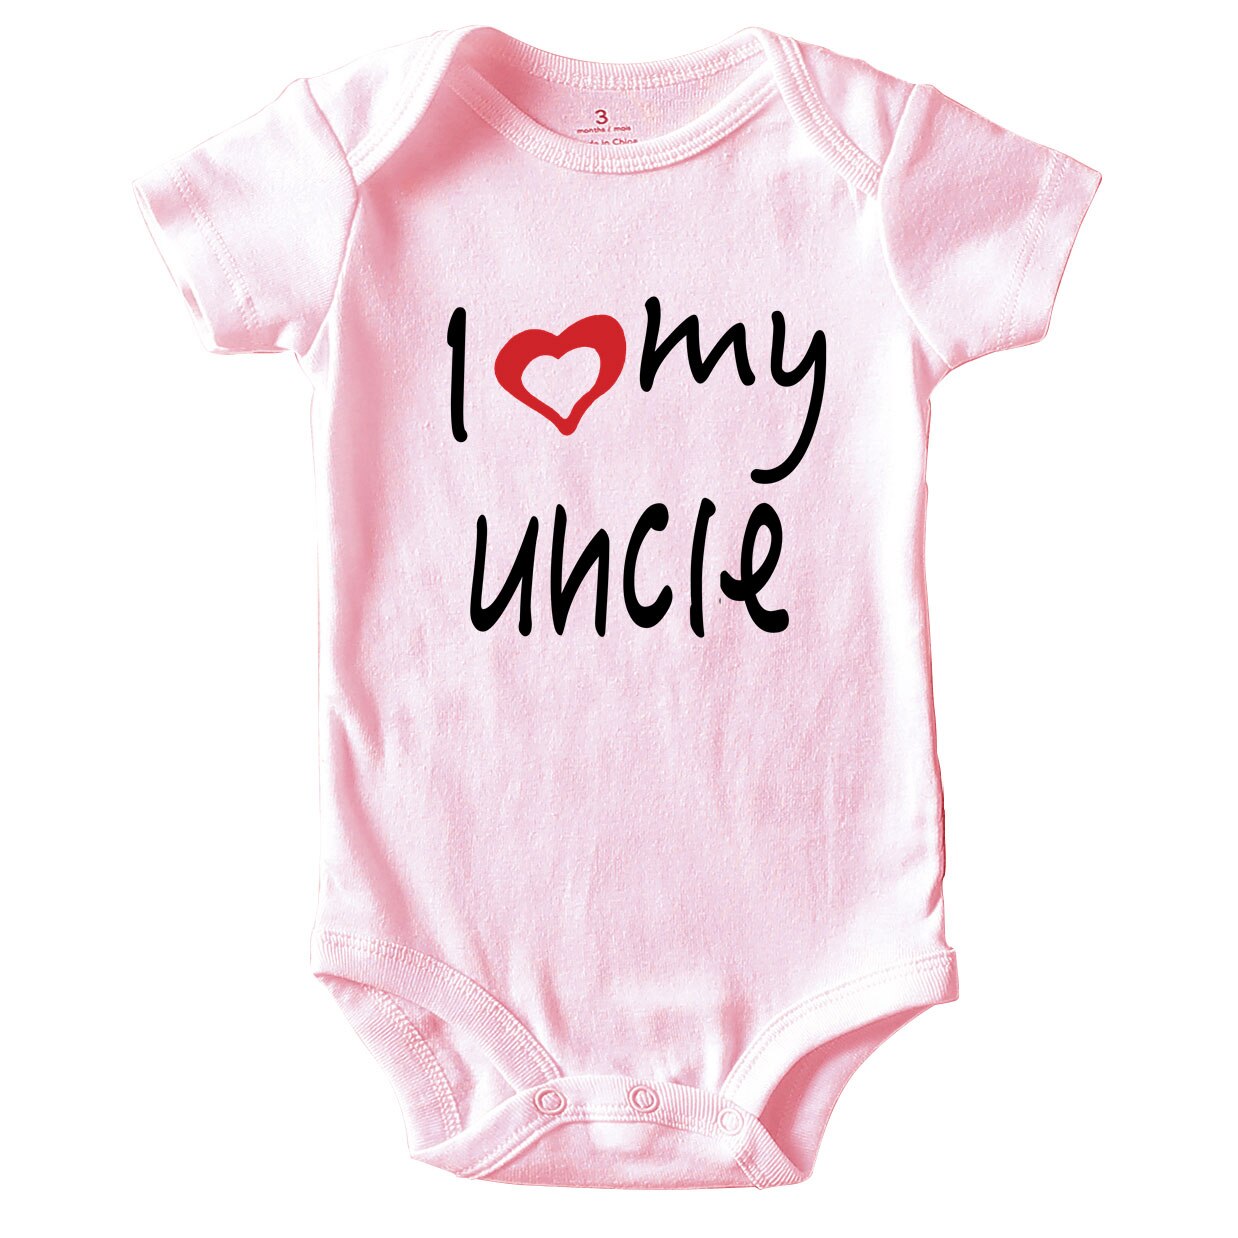 Boy Fall Clothes New Born Baby Items Romper for Ba...